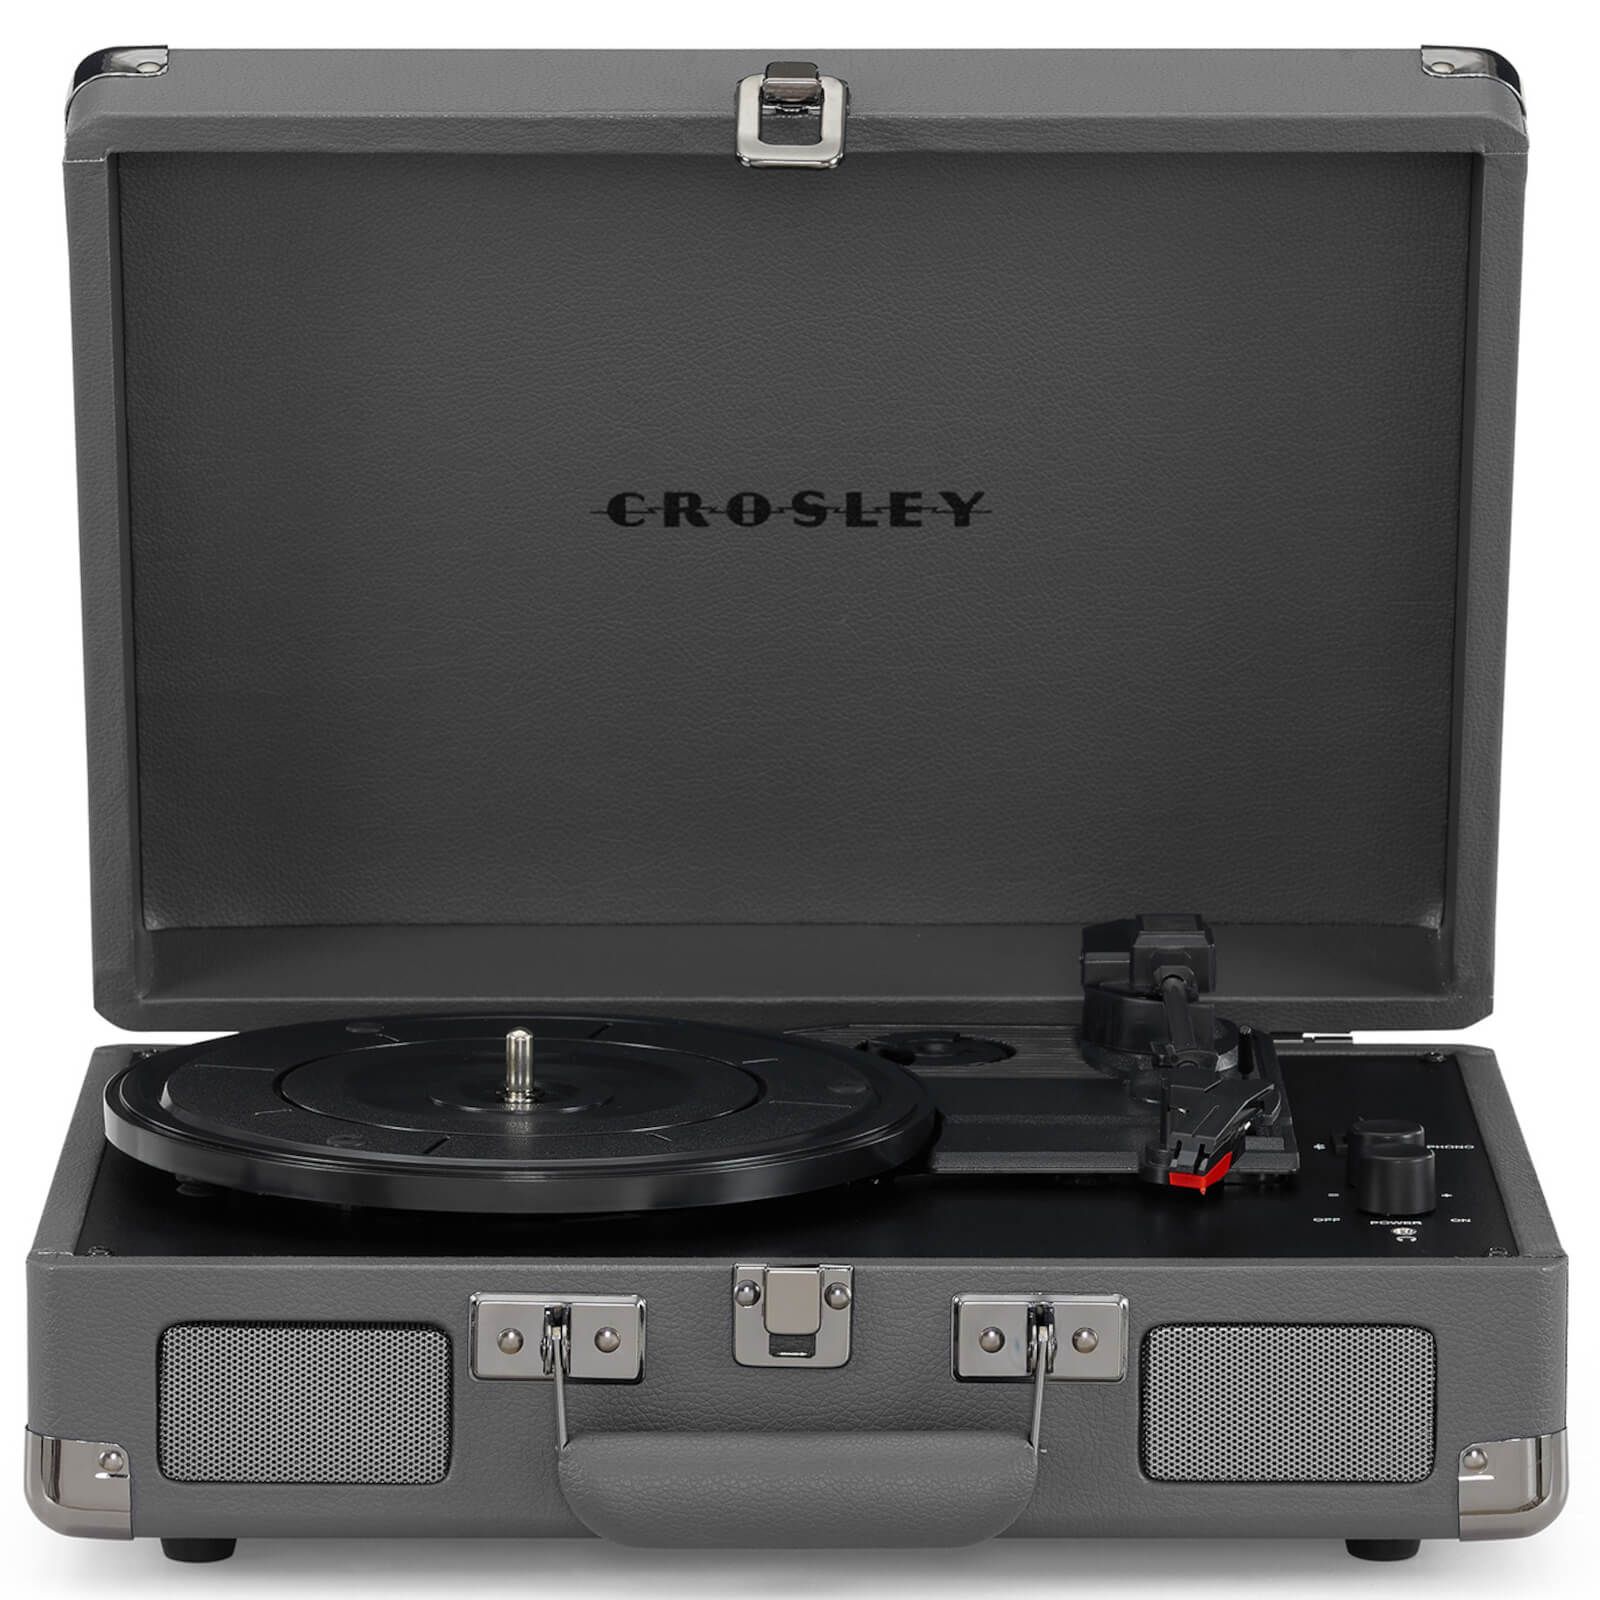 Cruiser Plus Deluxe Portable Turntable - With Bluetooth Output - Slate